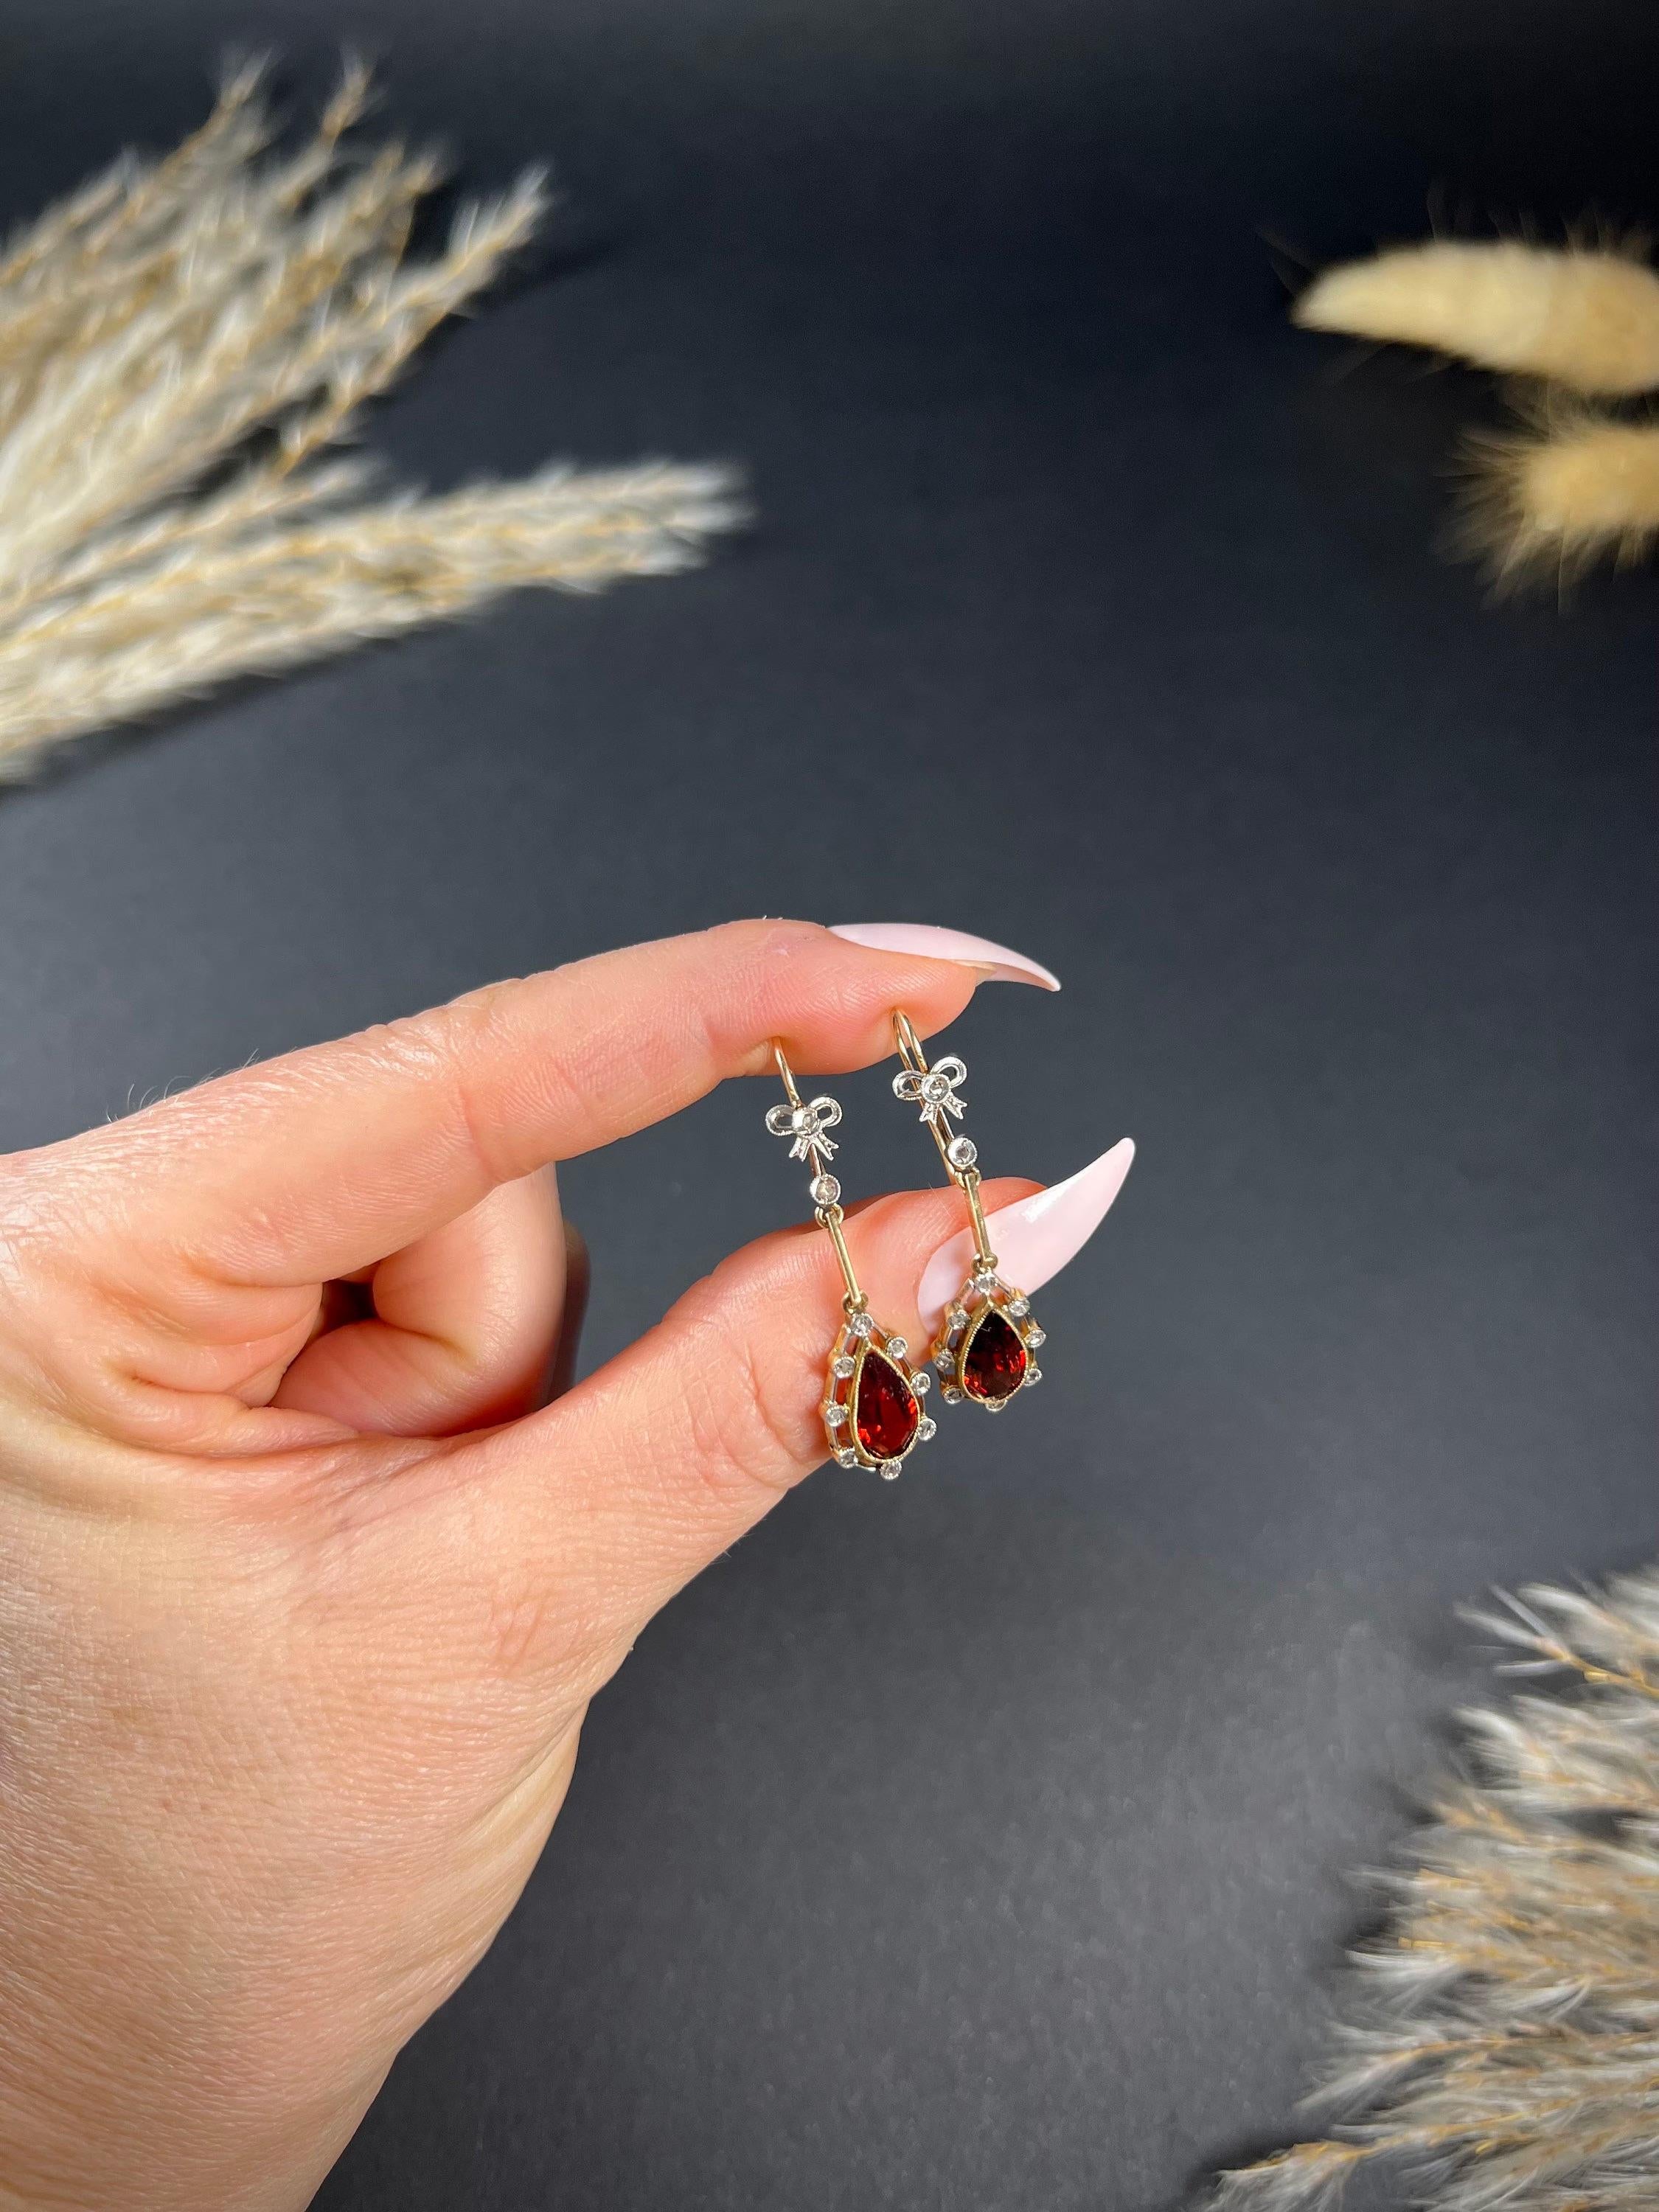 Antique Garnet Drop Earrings 

18ct Gold & Platinum Tested

Circa 1910

These Edwardian drop earrings are a true work of art. Crafted from 18ct yellow gold, they feature fabulous teardrop garnets that are surrounded by a halo of natural rose-cut